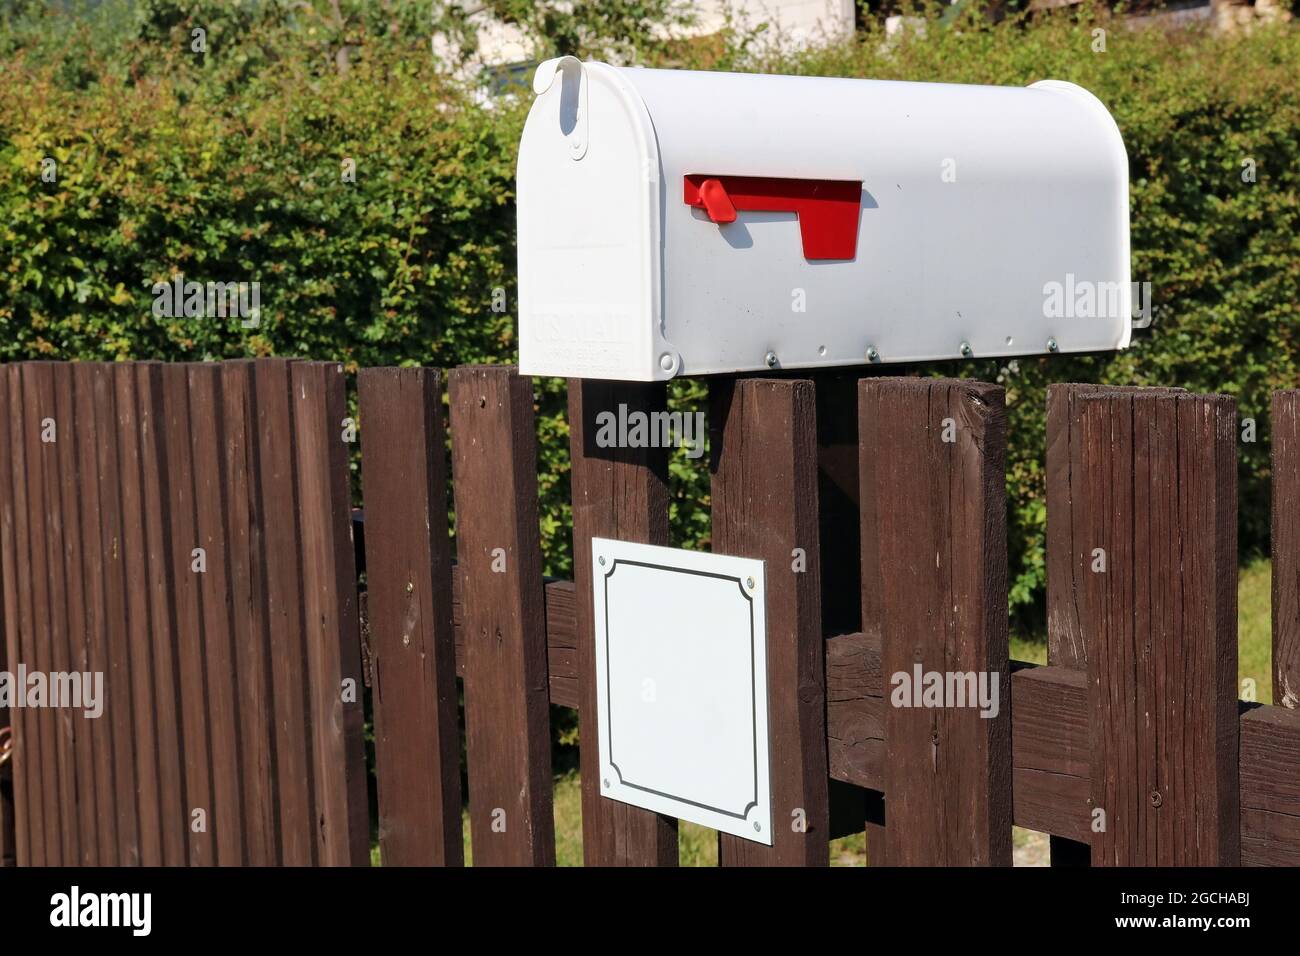 White metal mailbox mounted on a rustic  fence Stock Photo